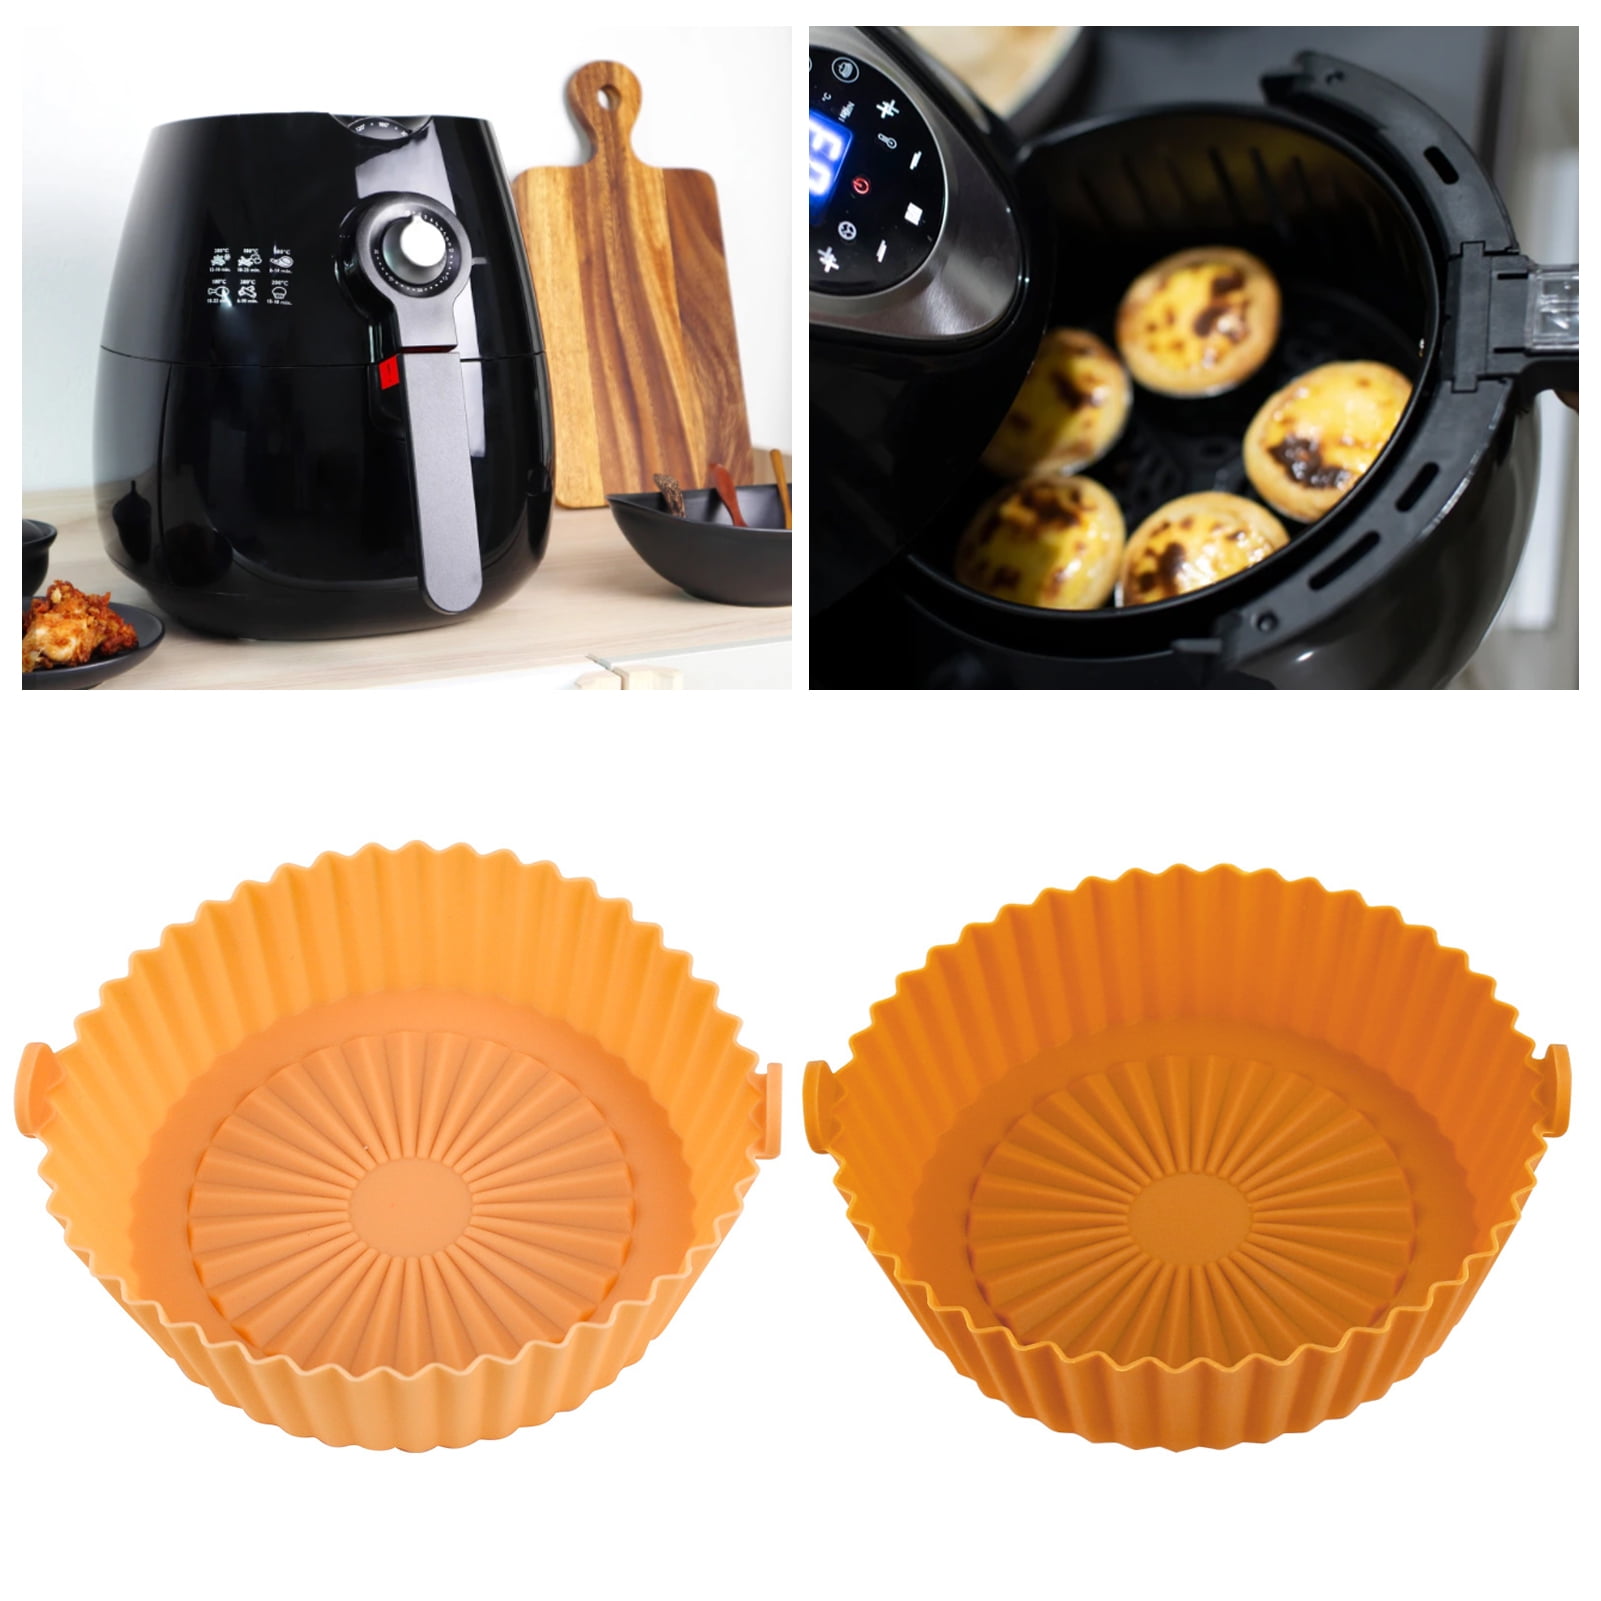 Travelwant Air Fryer Silicone Pot - [UPGRADED] Food Safe Air